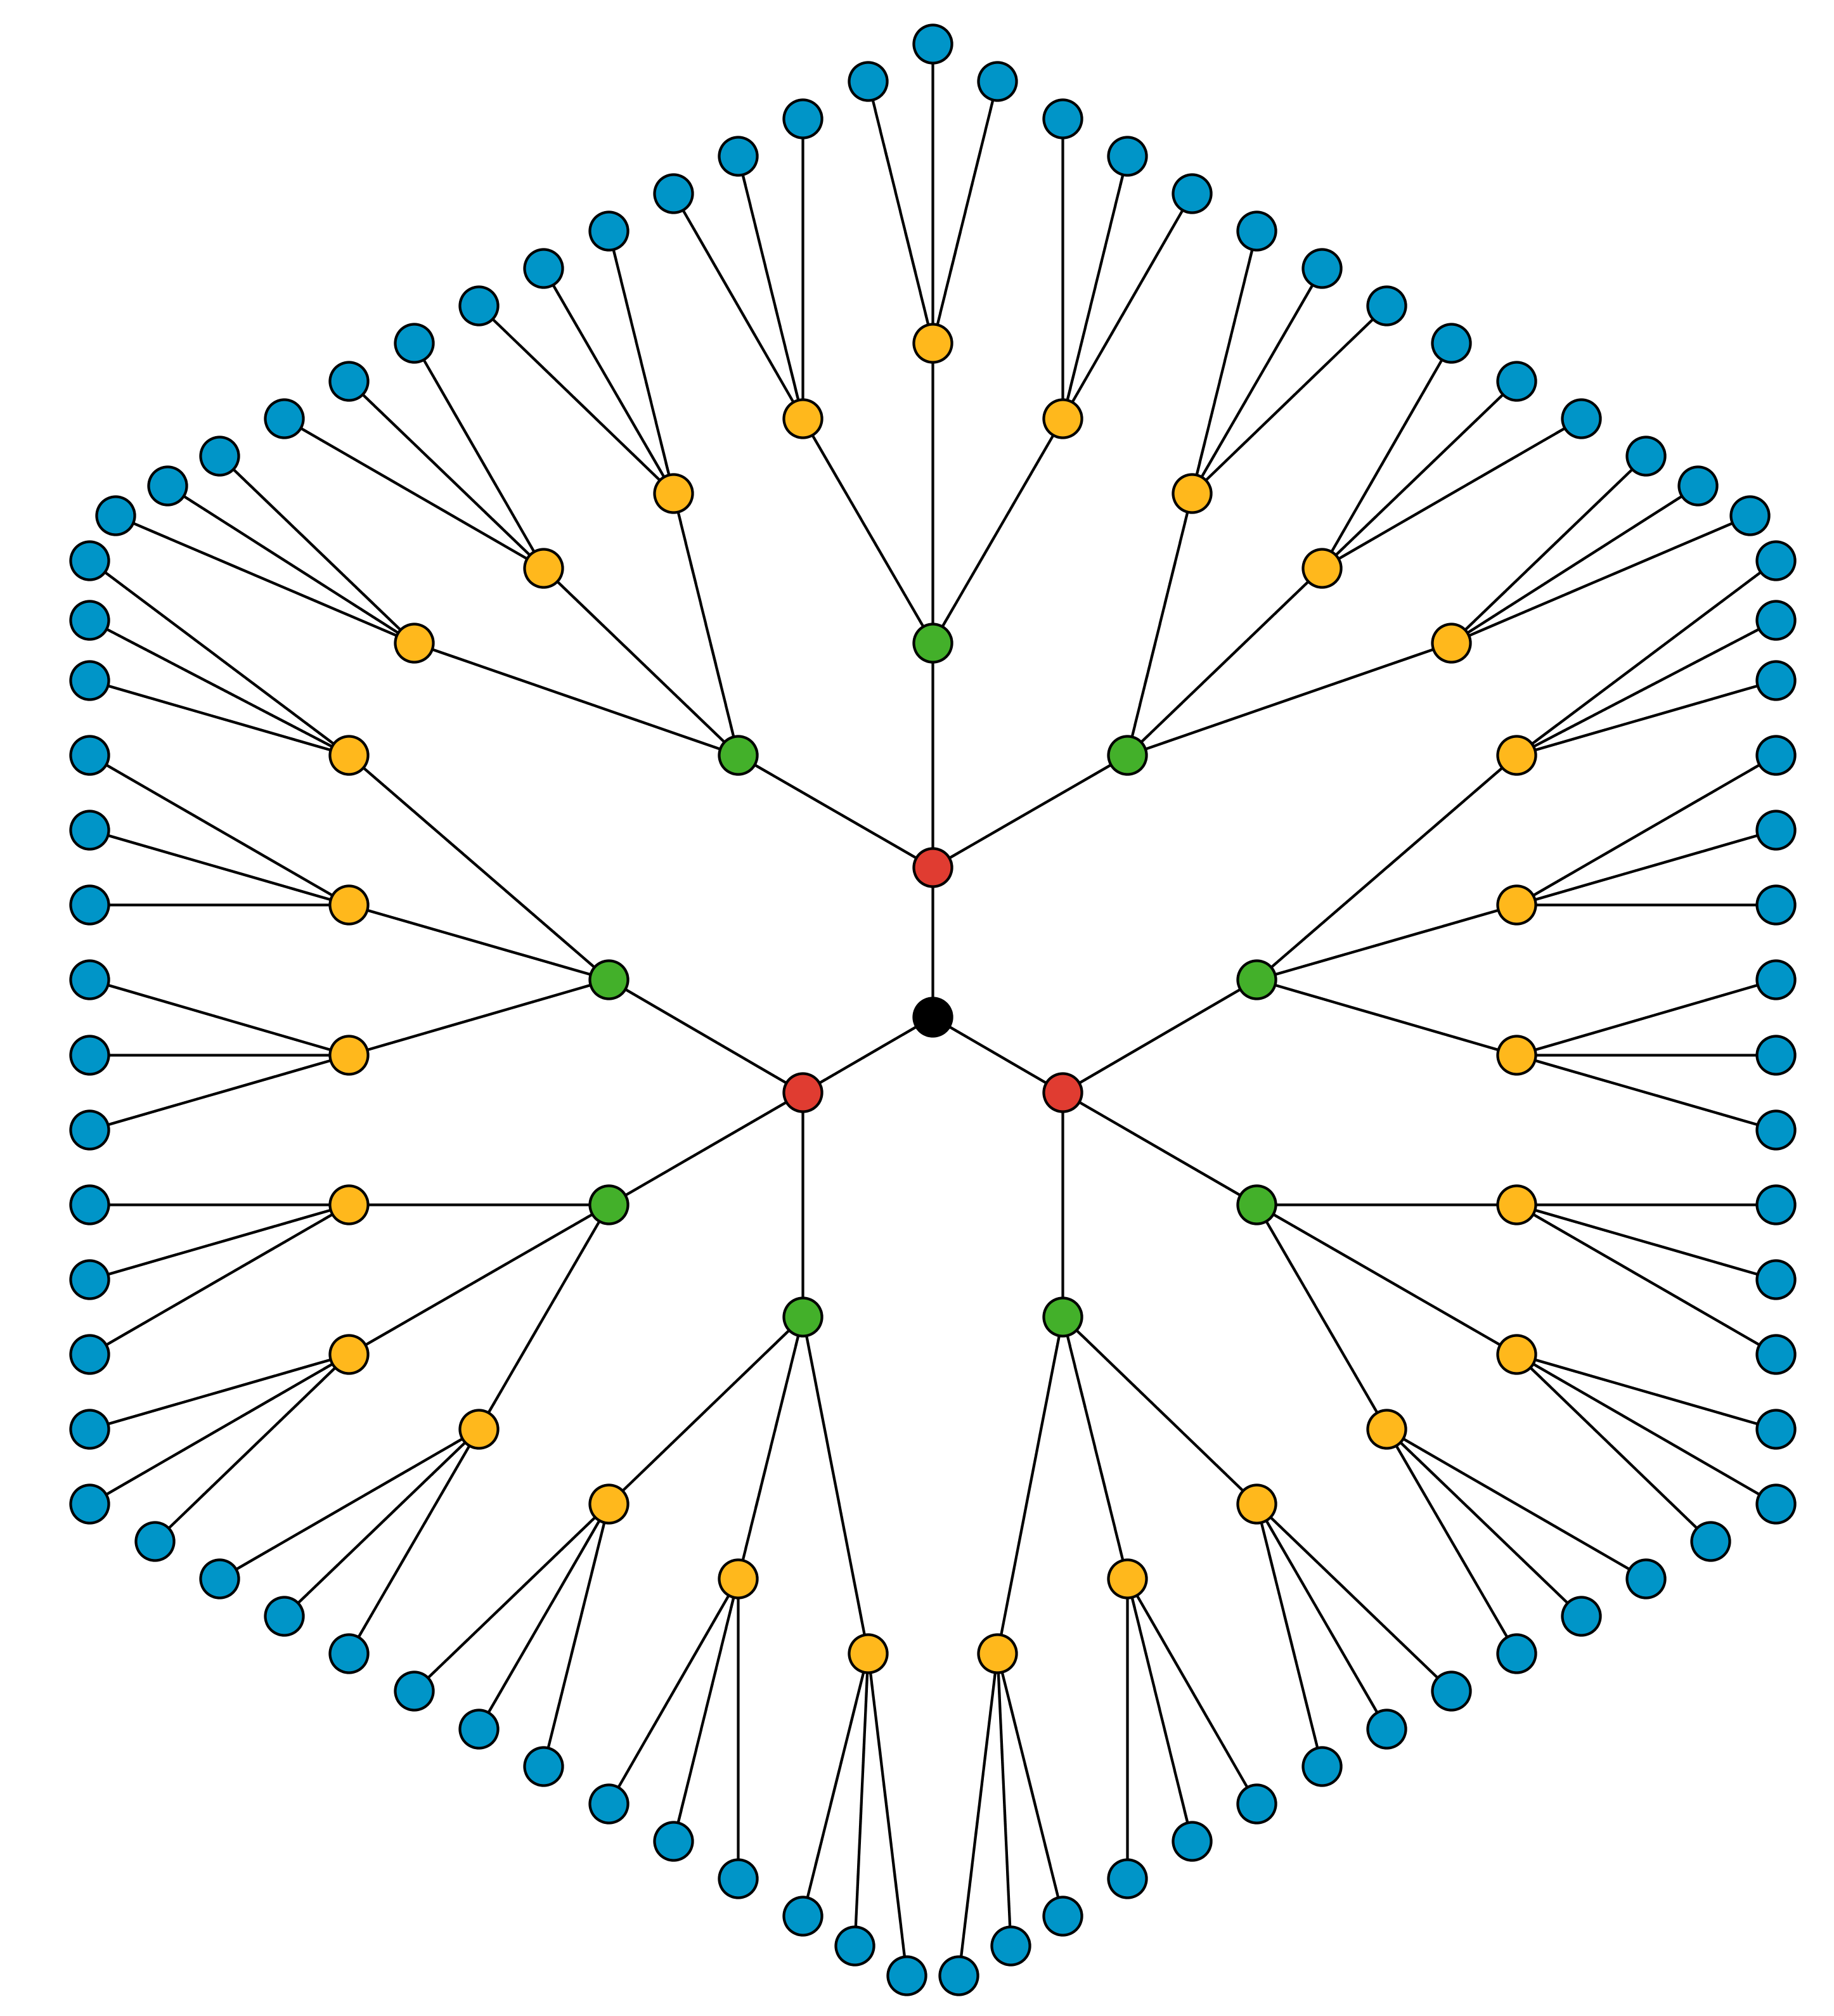 A figure of a series of dot branches. In the center is a black dot. Three branches extend from the black dot with one red dot at the end of each branch. There are three branches that extend from each red dot with one green dot at the end of each branch. There are three branches that extend from each green dot with one yellow dot at the end of each branch. There are three branches that extend from each yellow dot with one blue dot at the end of each branch.